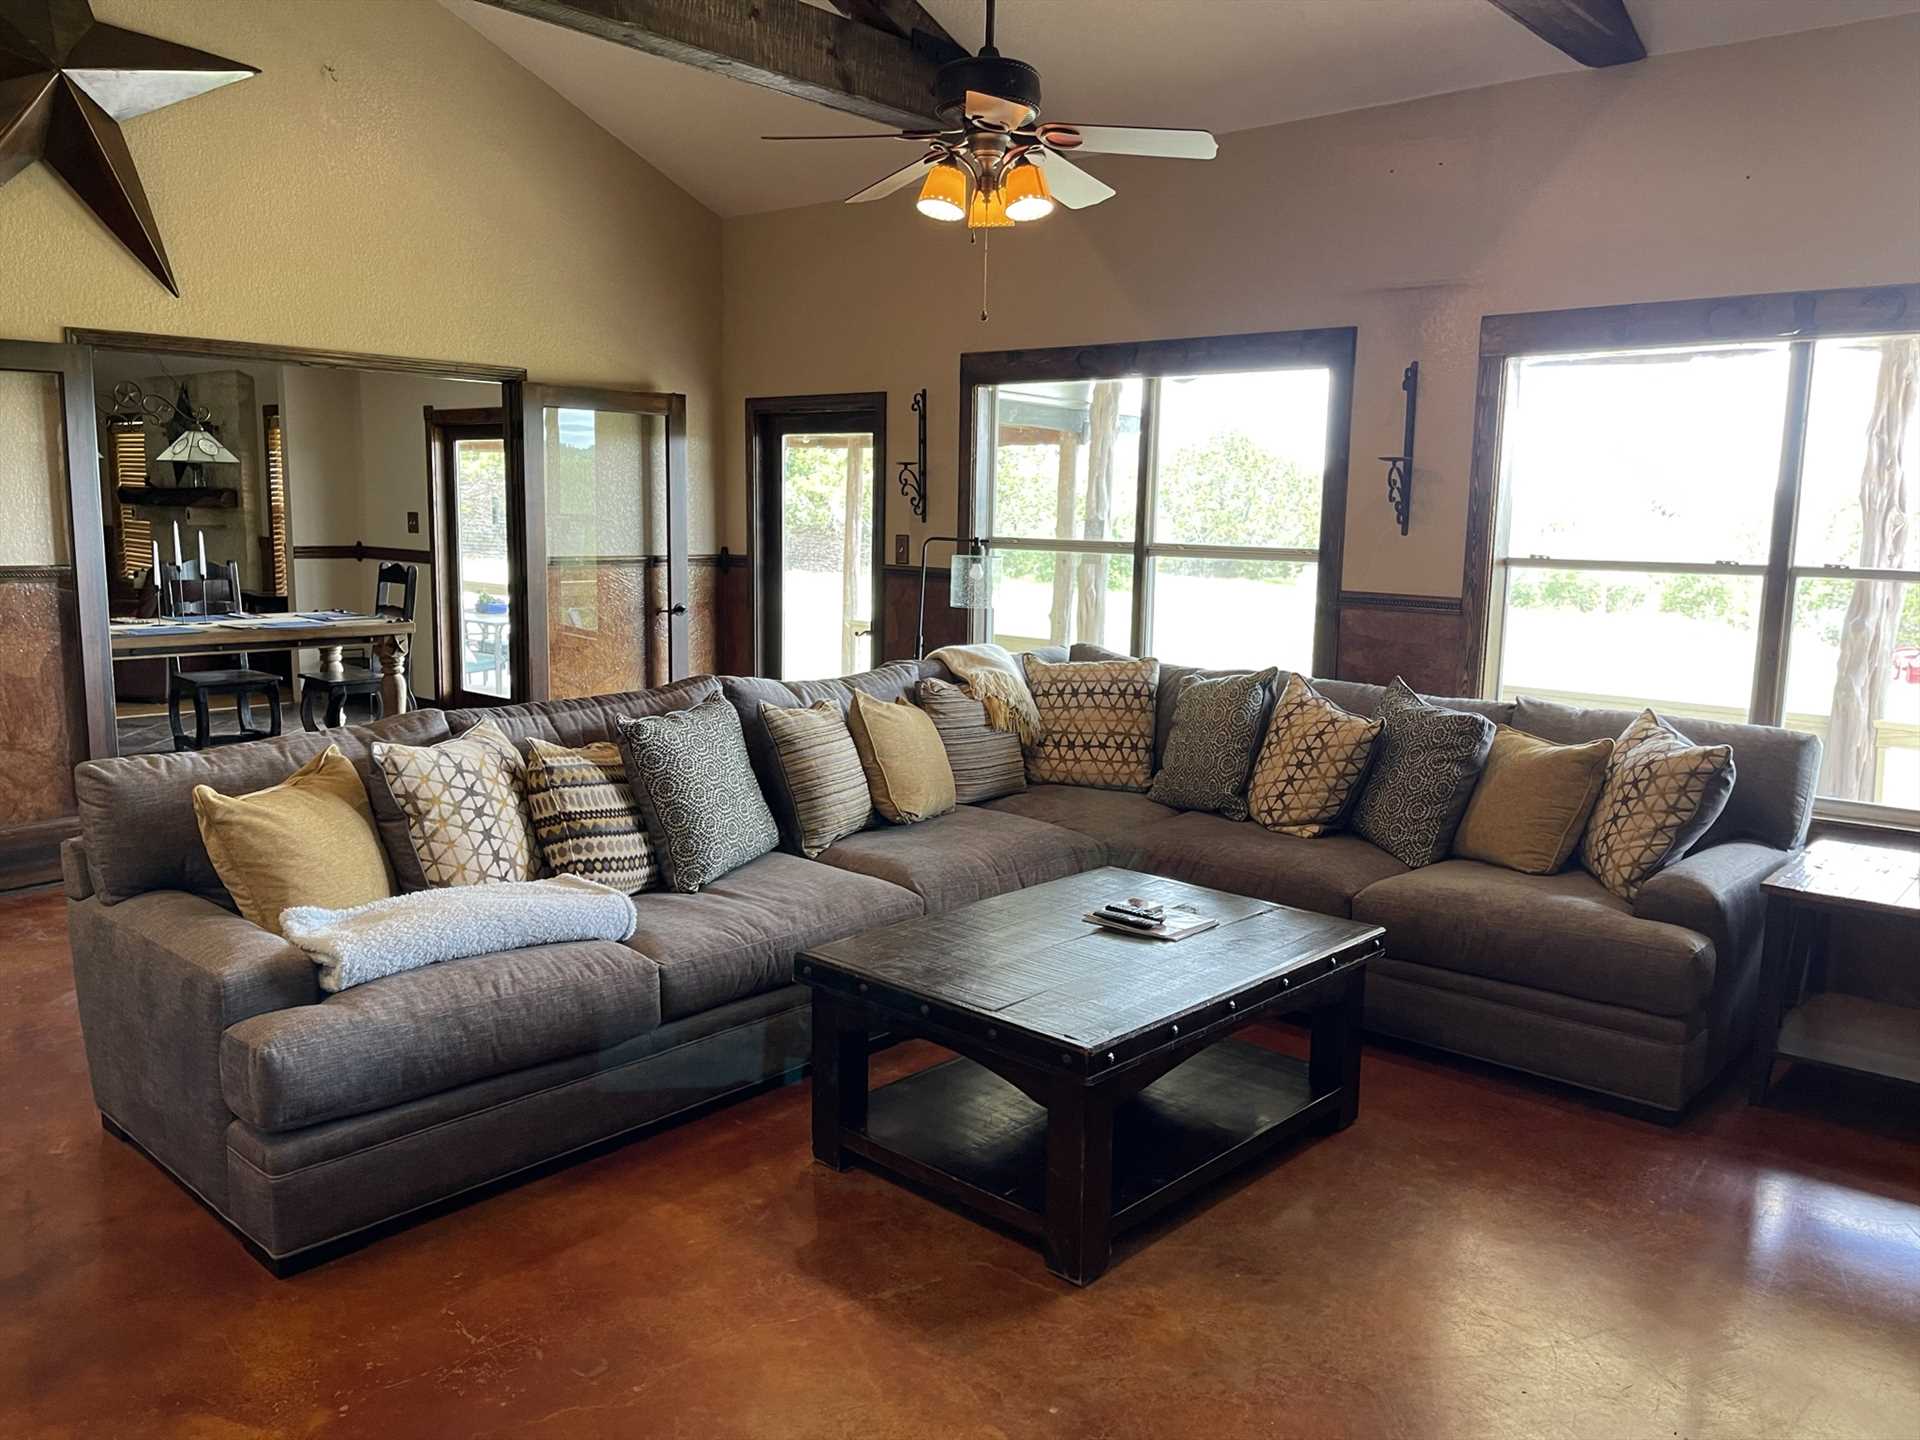                                                 The enormous and comfortable living area sets the perfect stage for games, movie nights, and conversation!